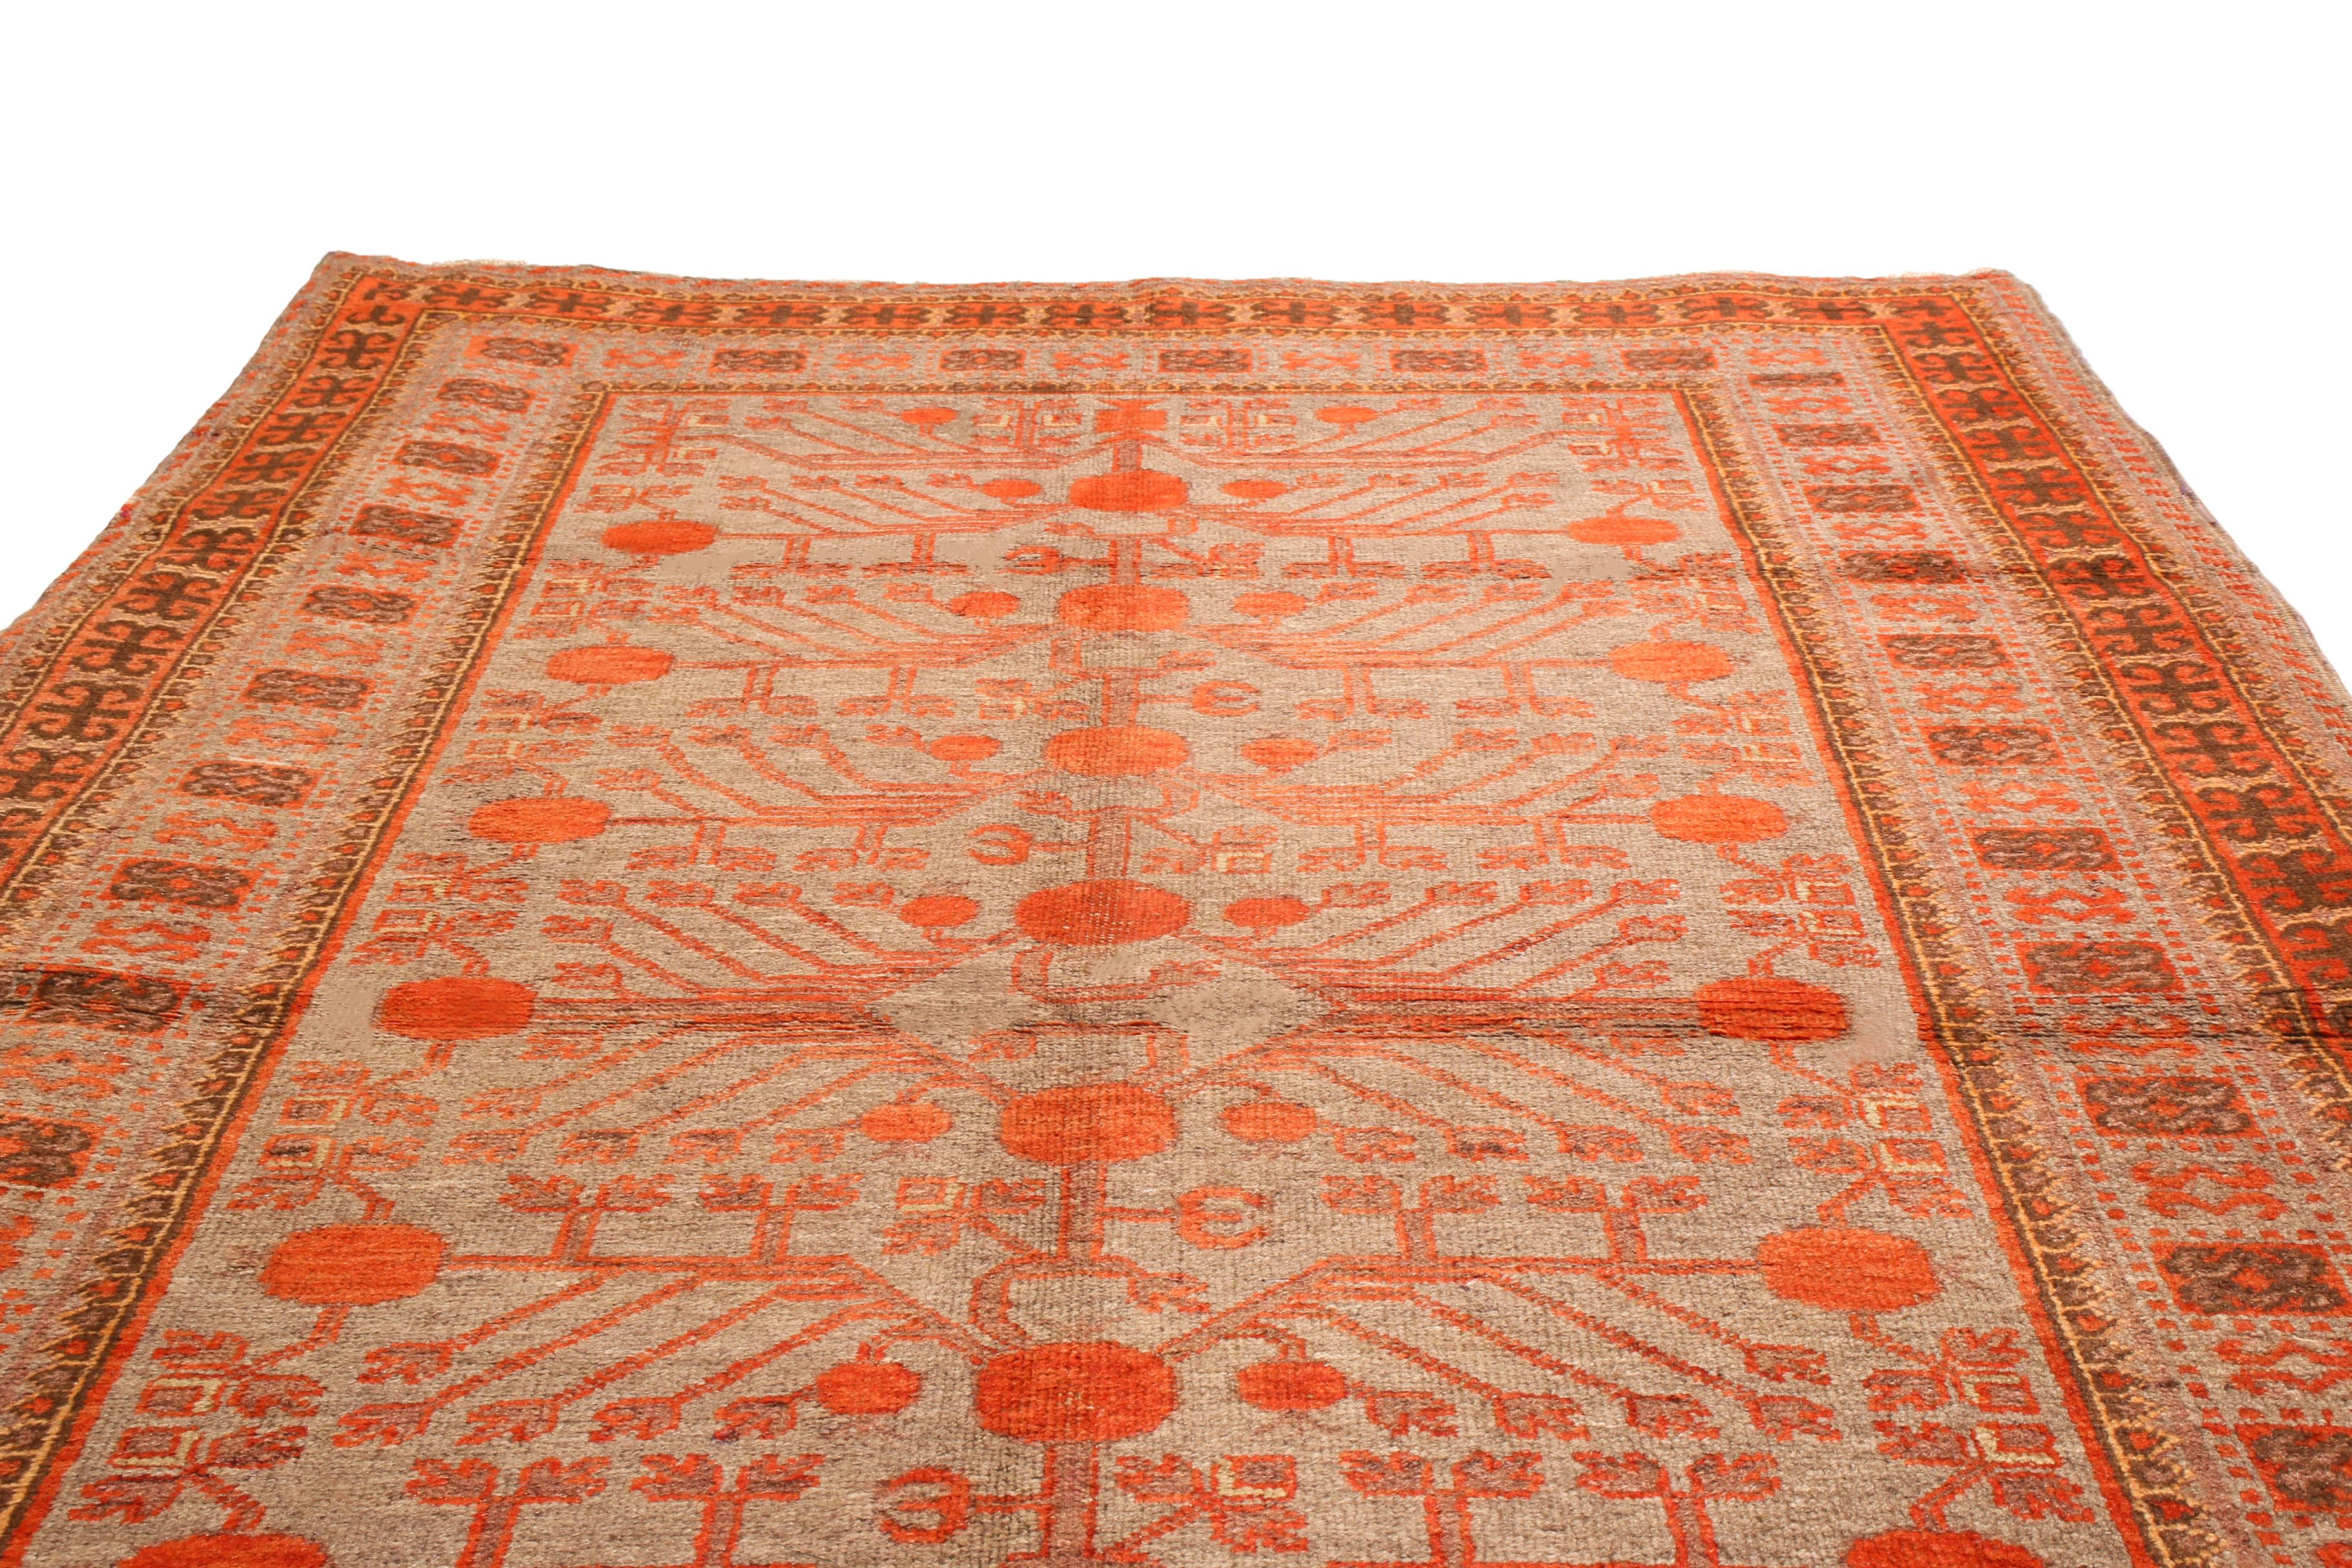 Originating from East Turkestan in 1920s, this antique Khotan rug features an all-over field design, including meaningful regional symbols drawn in a transitional style. Handwoven in high quality wool, the textural light blue field features